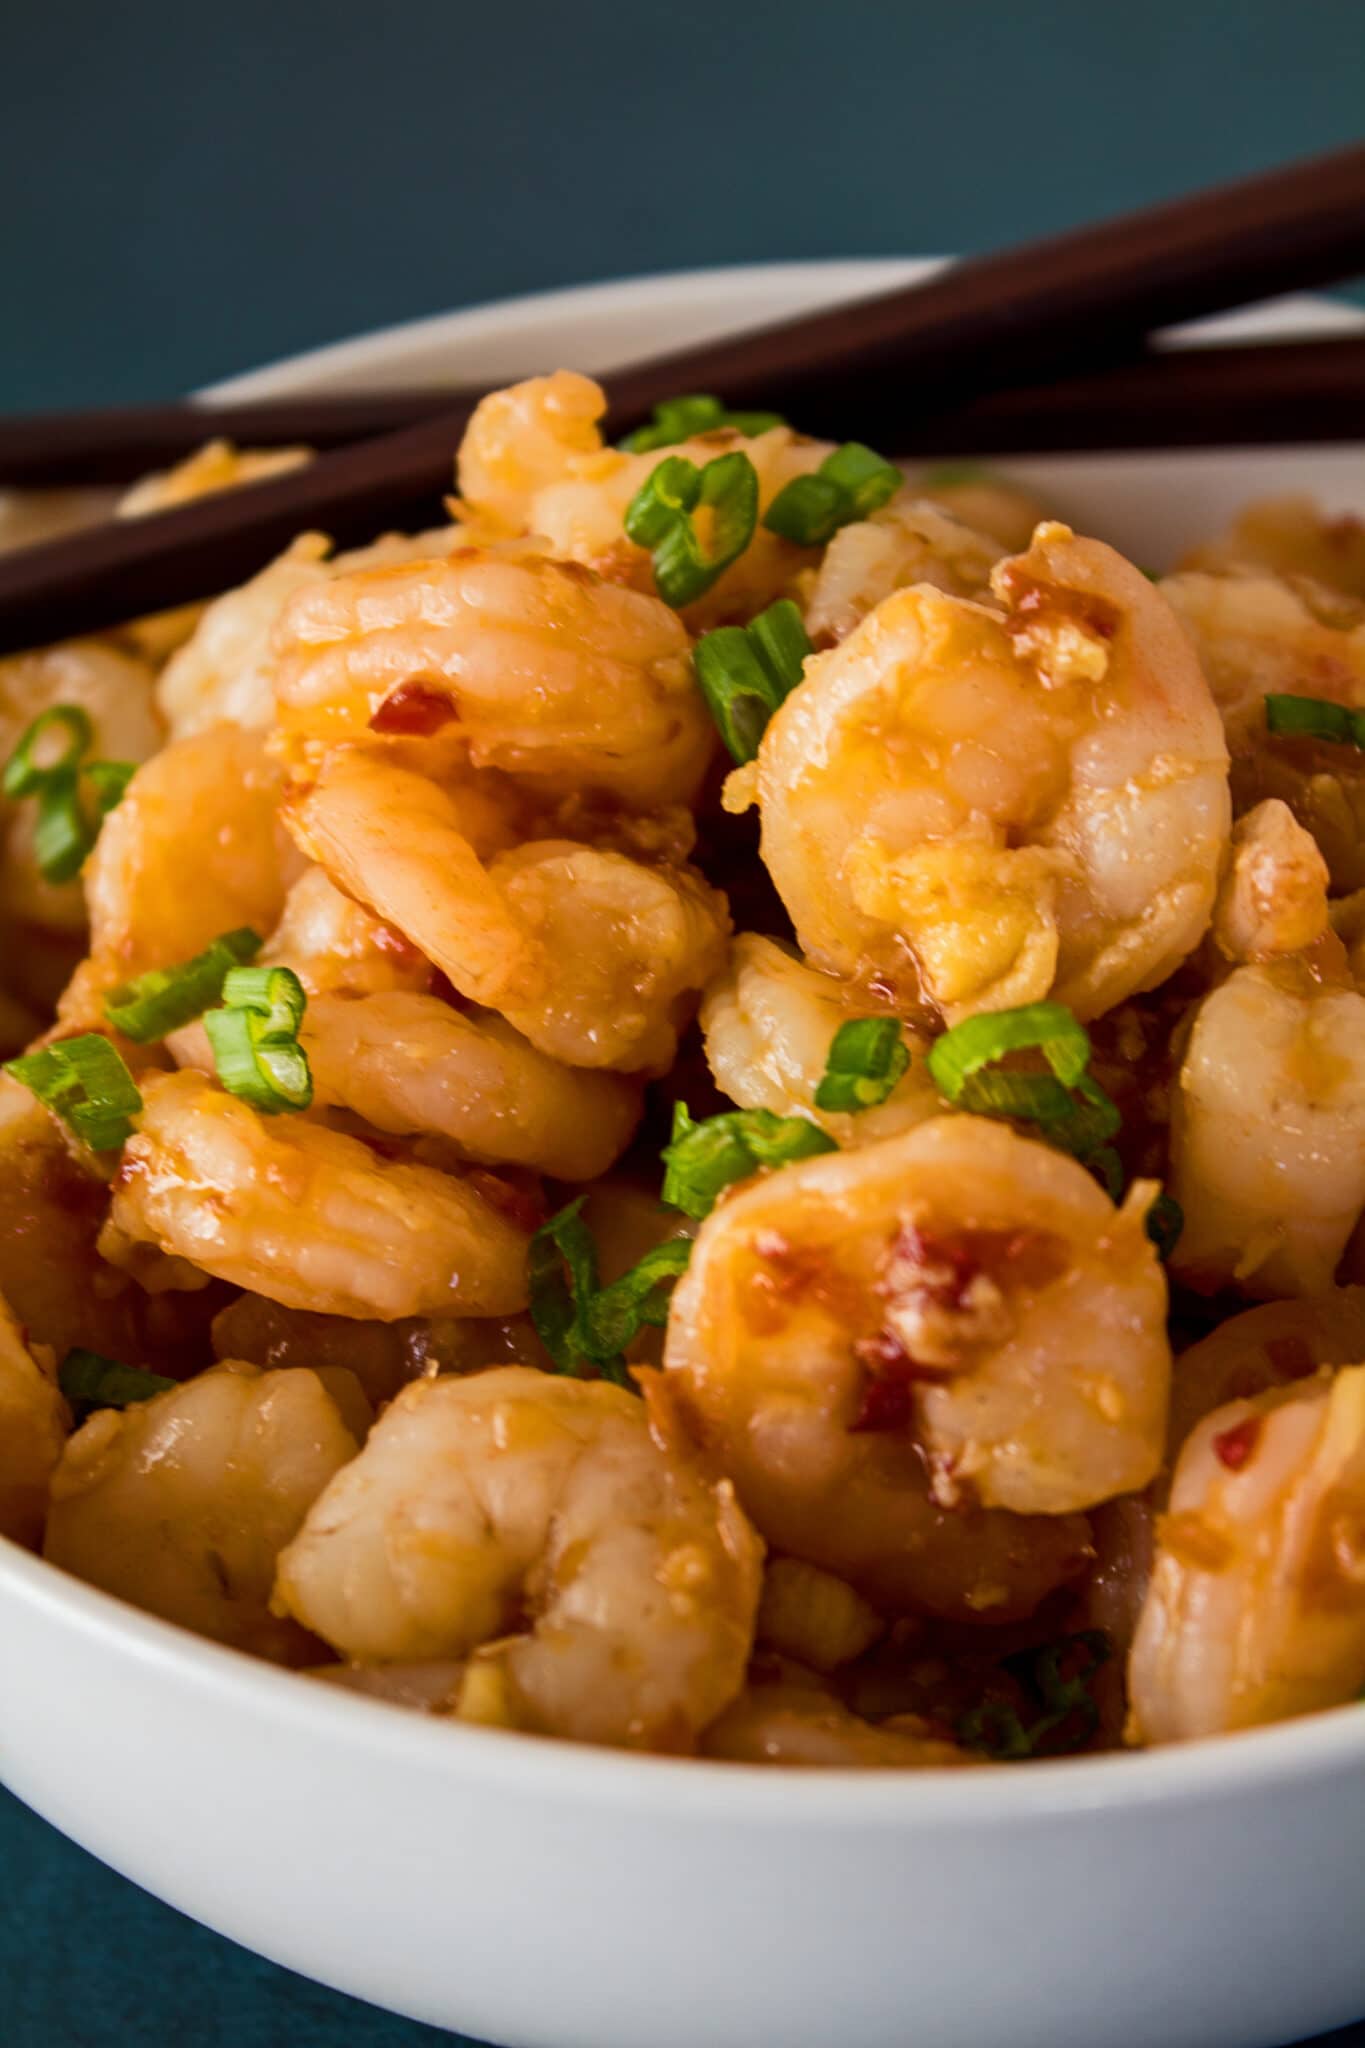 Hunan Shrimp {Hot and Spicy Chinese Shrimp} | Bake It With Love